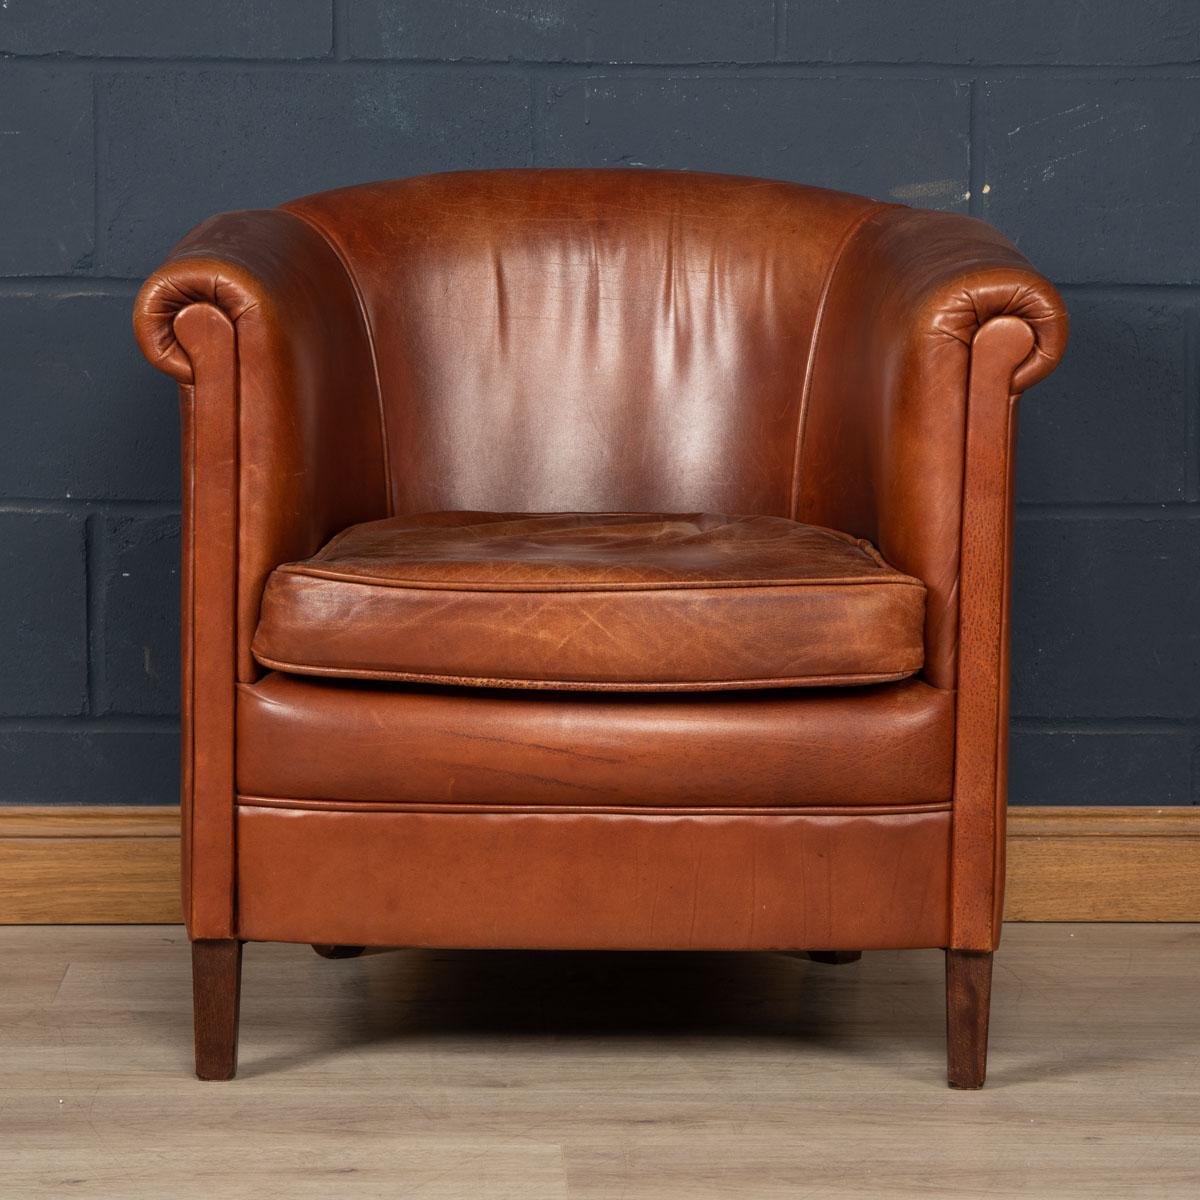 Showing superb patina and colour, this wonderful tub chair was hand upholstered sheepskin leather in Holland by the finest craftsmen in the latter part of the 20th century.

CONDITION
In good condition - some wear consistent with normal use,